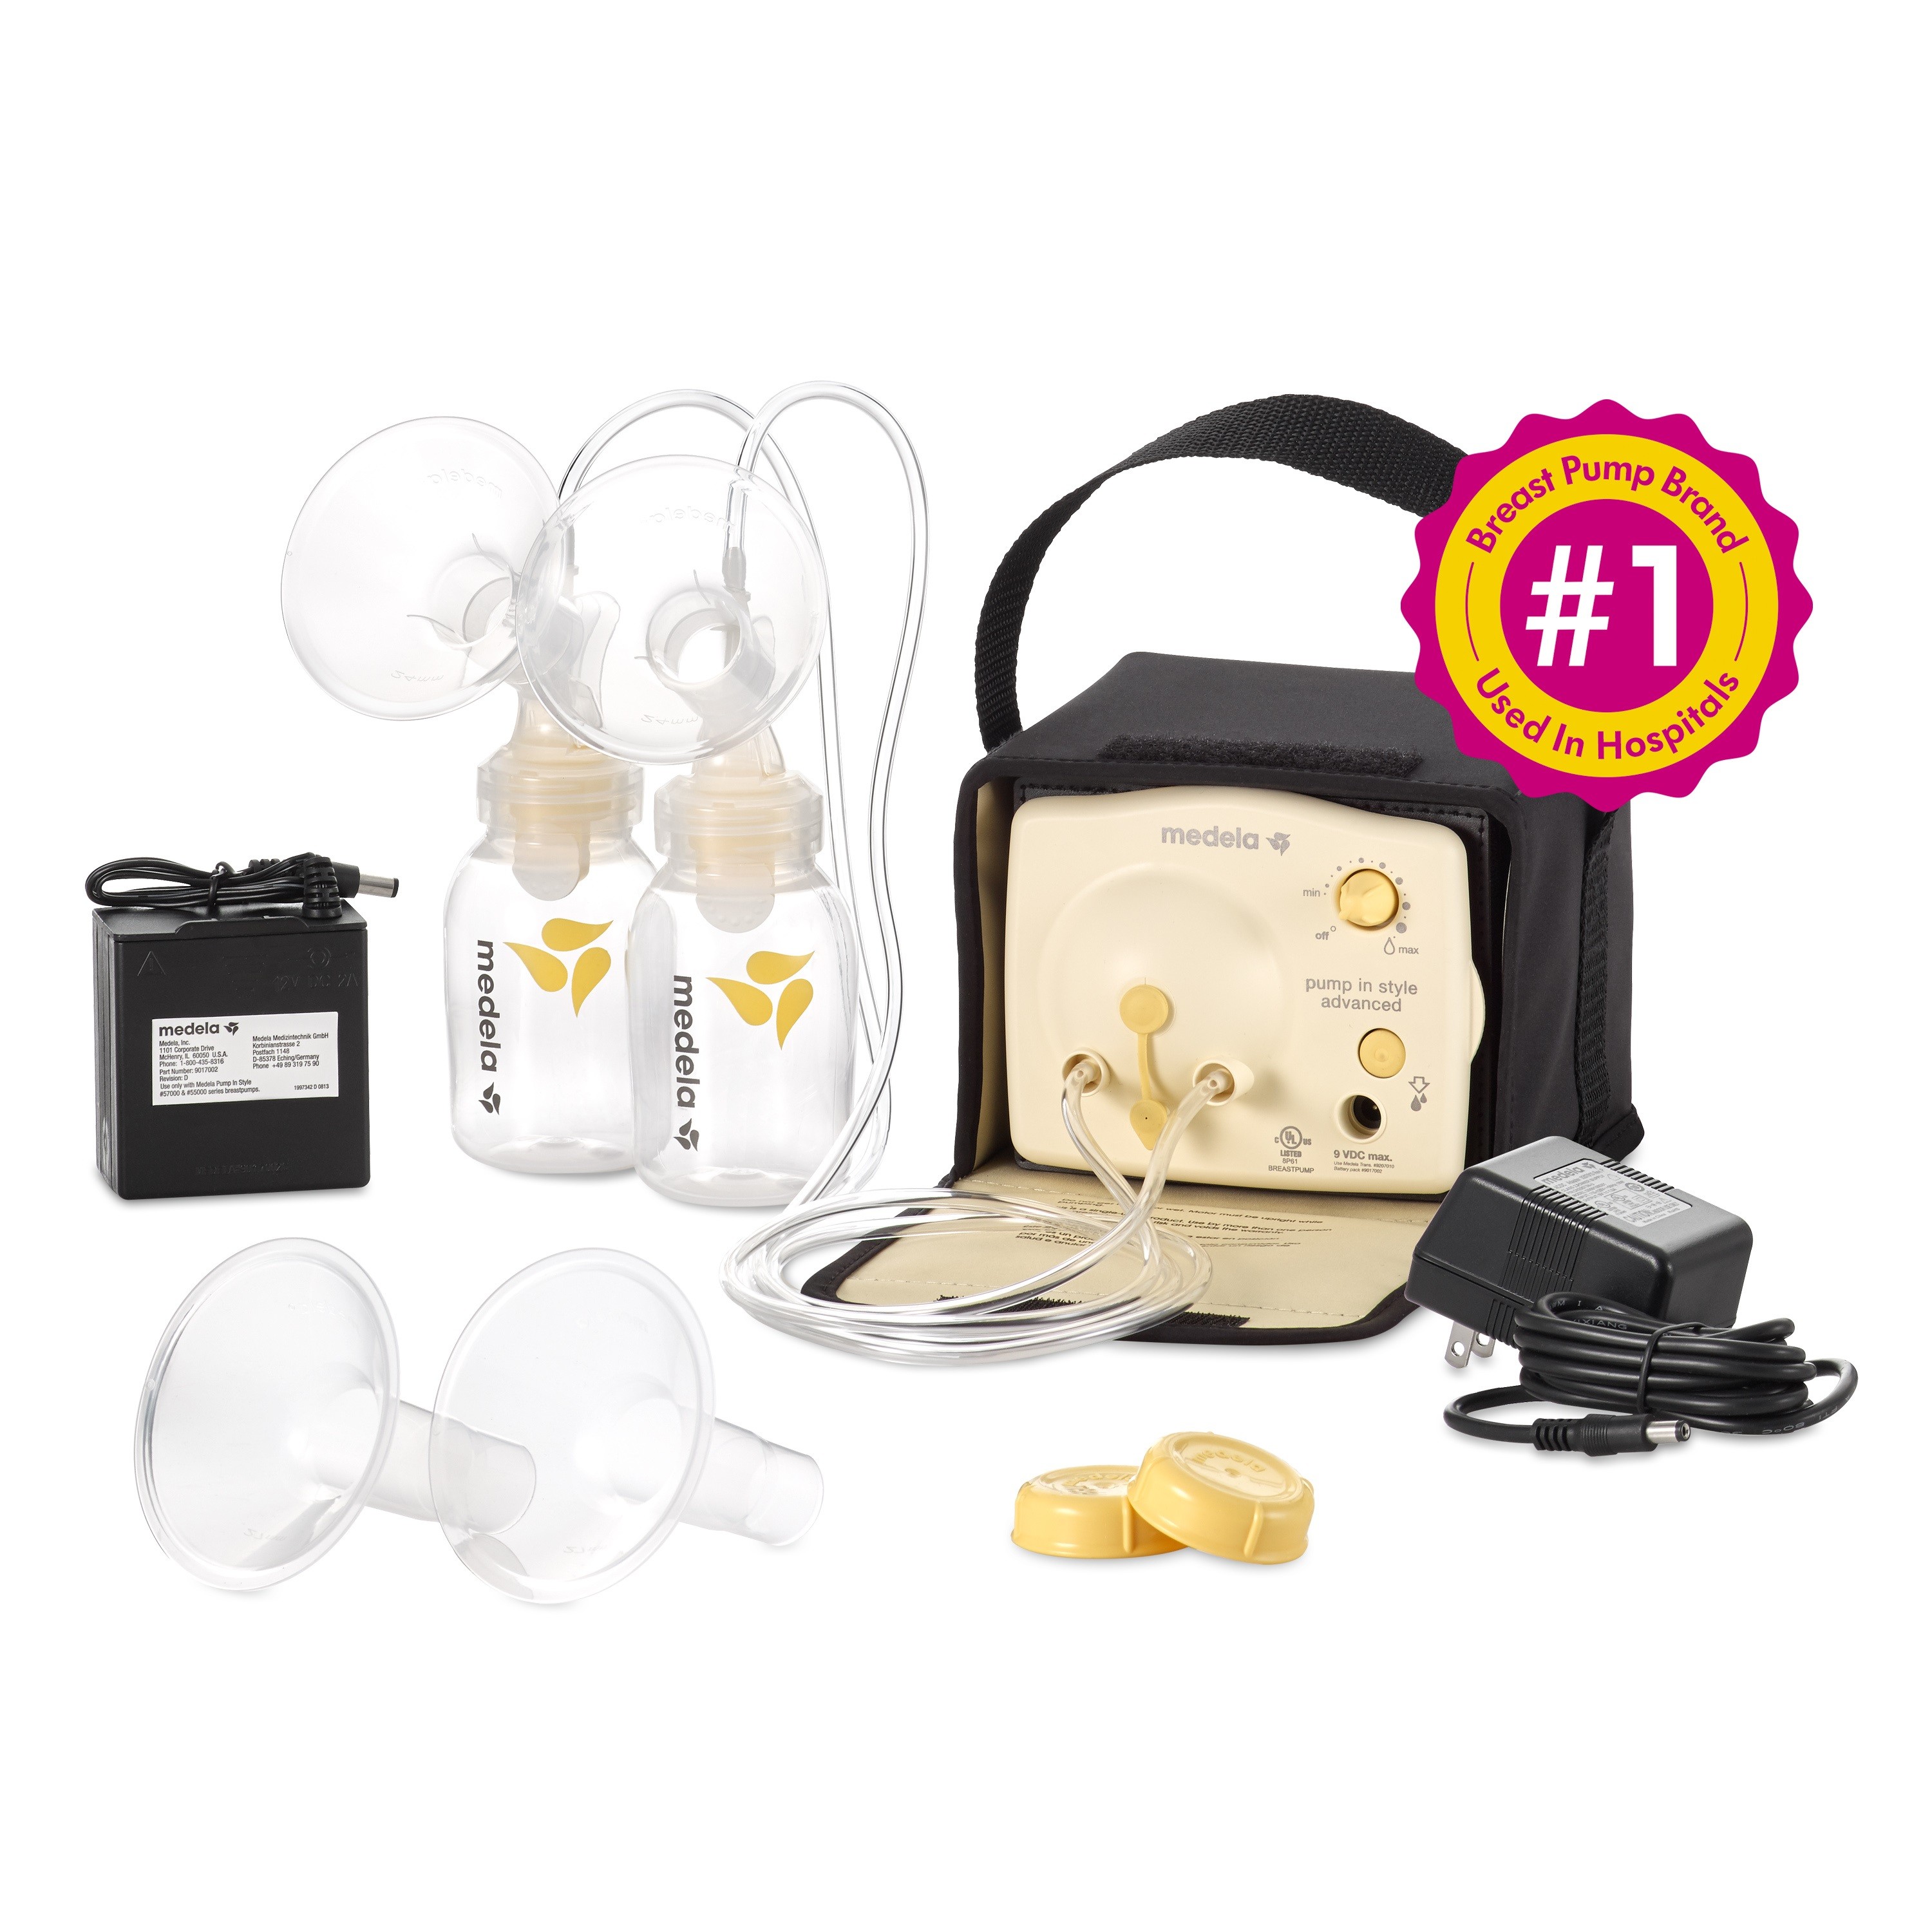 Bottles included Breast Pump Kit for Medela Pump in Style Advanced Breastpump 